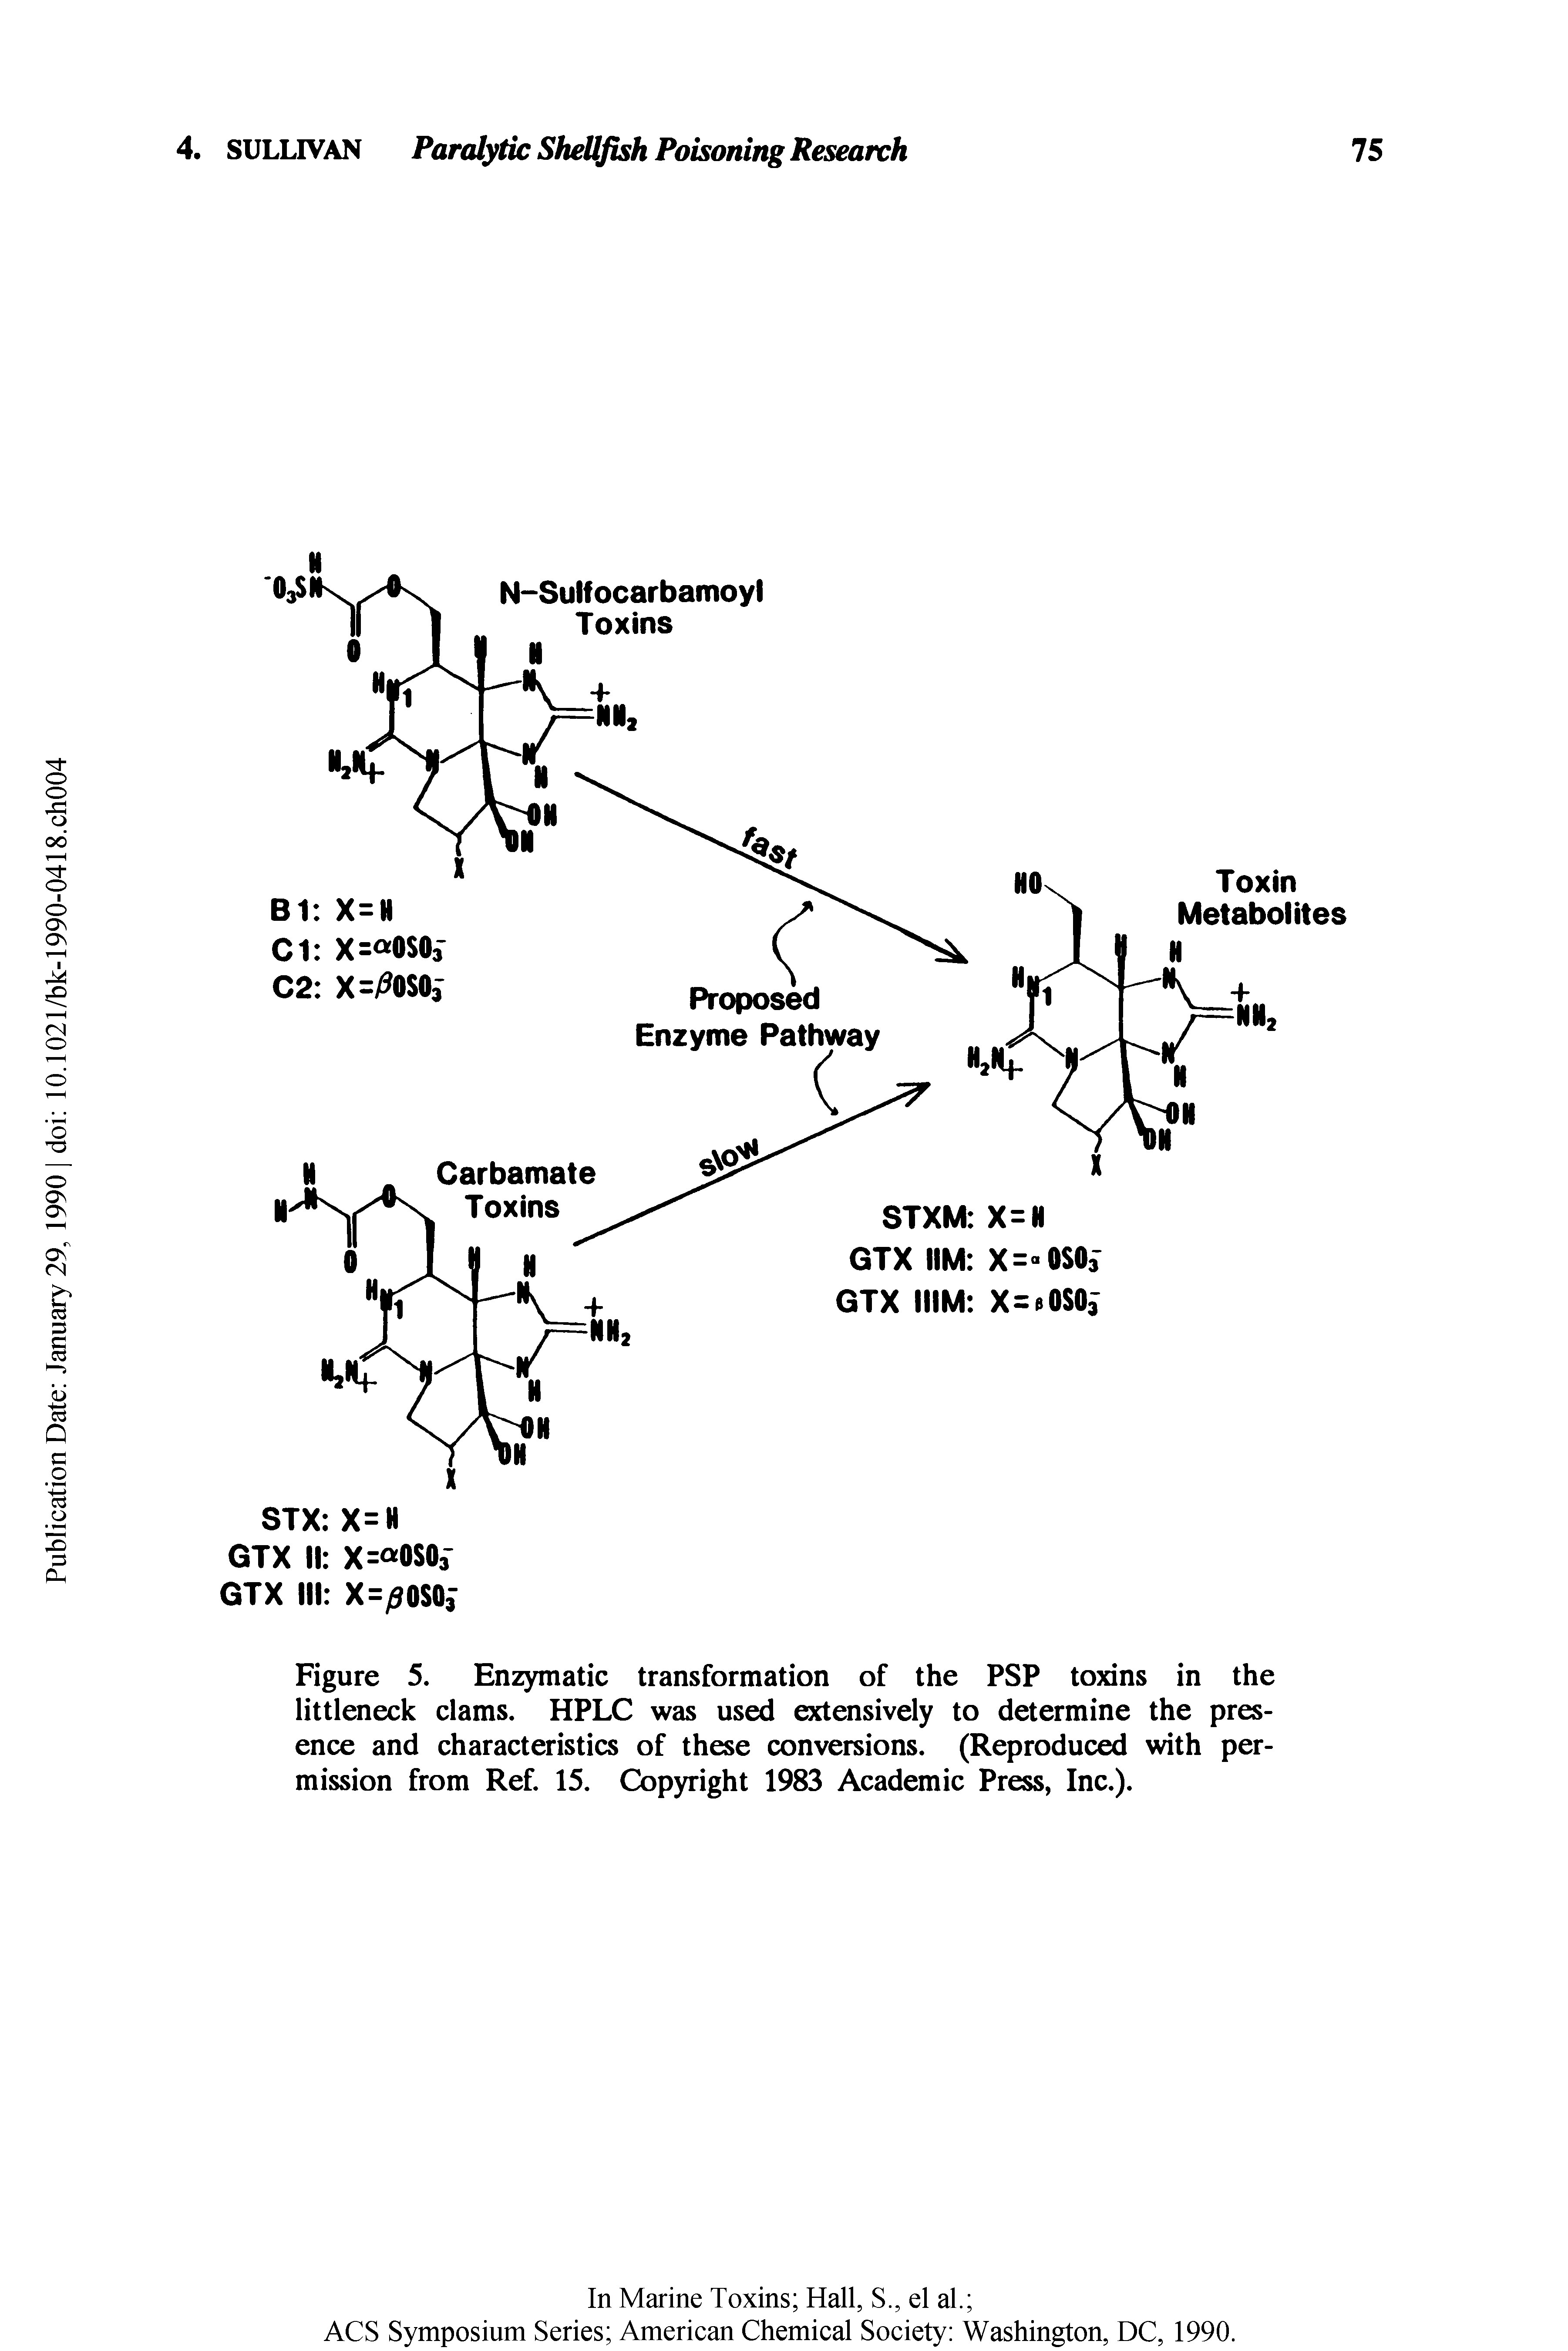 Figure 5. Enzymatic transformation of the PSP toxins in the littleneck clams. HPLC was used extensively to determine the presence and characteristics of these conversions. (Reproduced with permission from Ref. 15. Copyright 1983 Academic Press, Inc.).